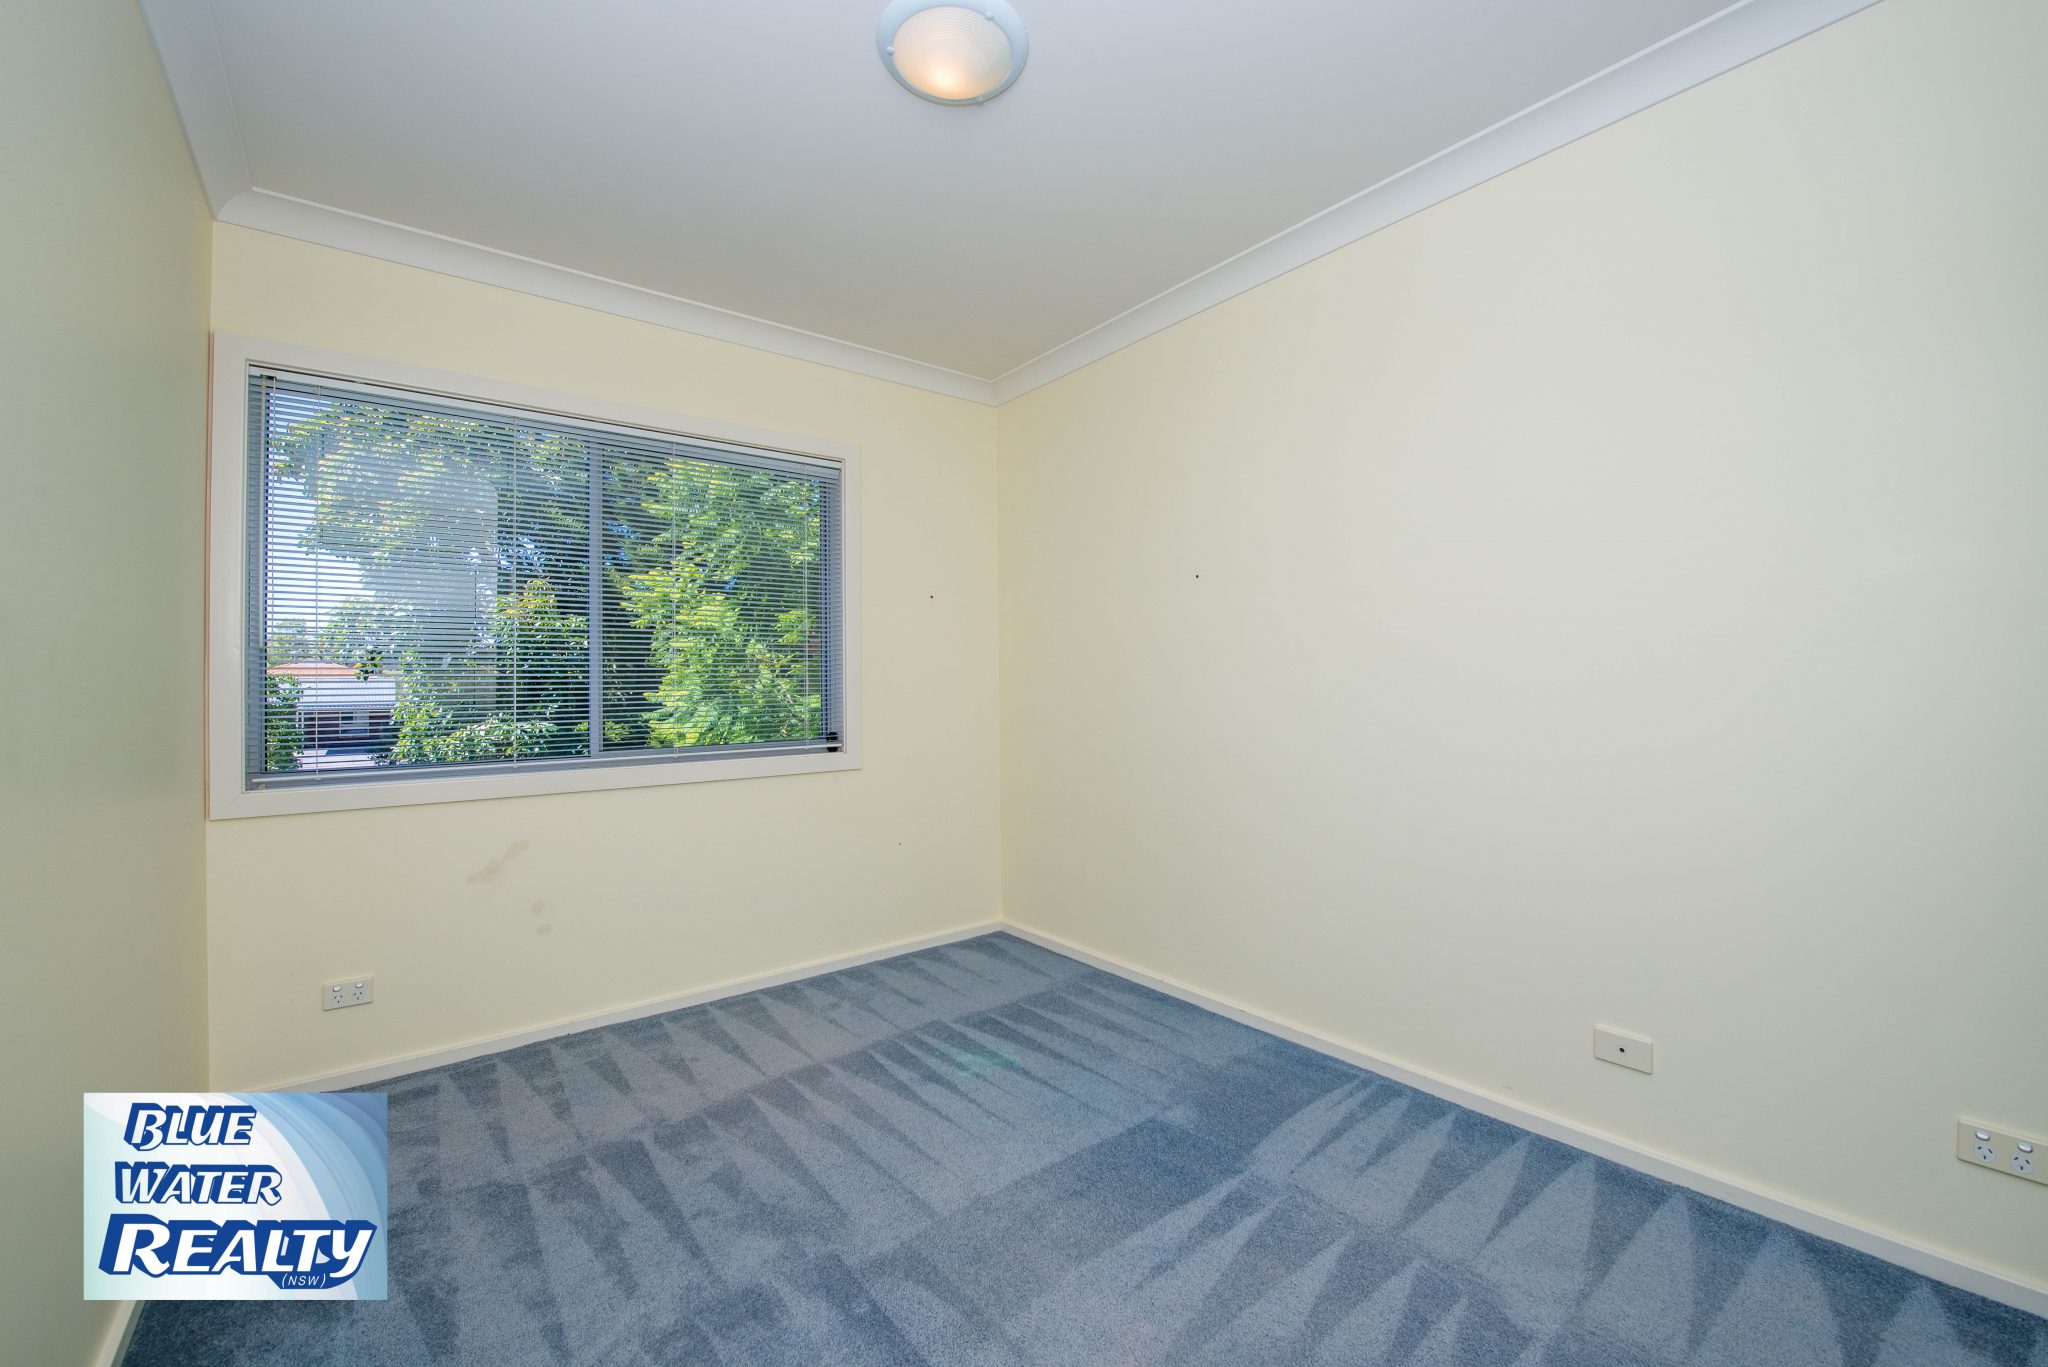 Location … “Perfect” – Nelson Bay NSW 2315